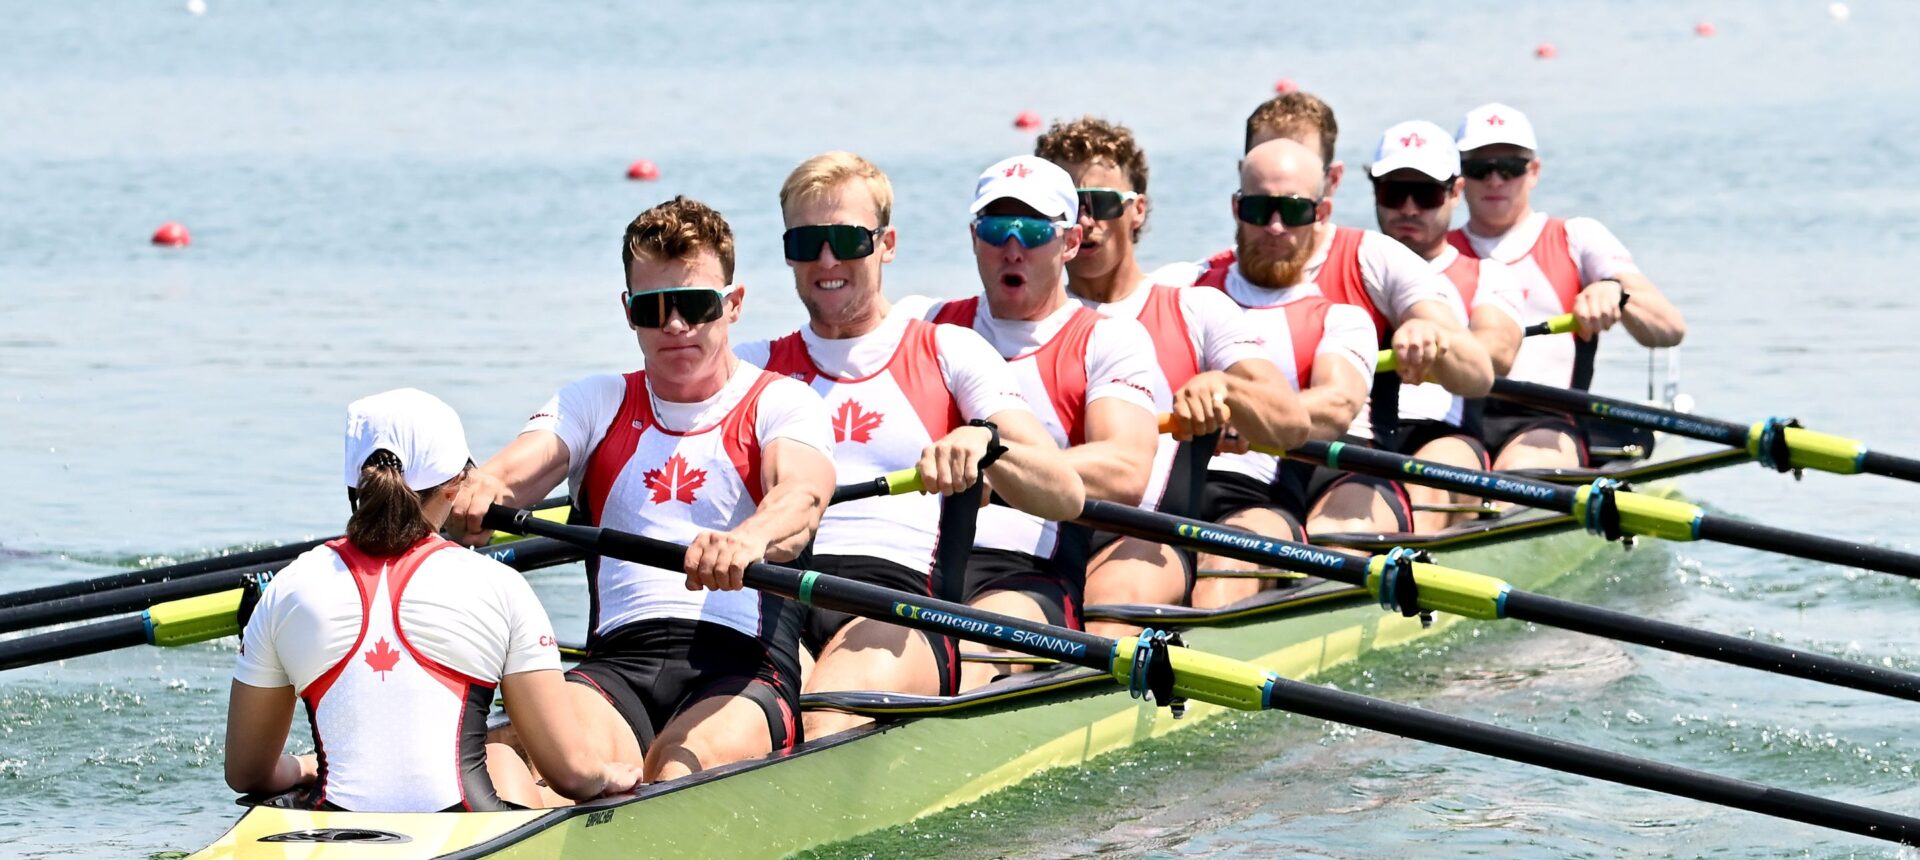 Thrilling Racing and Valuable Experience at World Cup II, Setting Sights on Henley